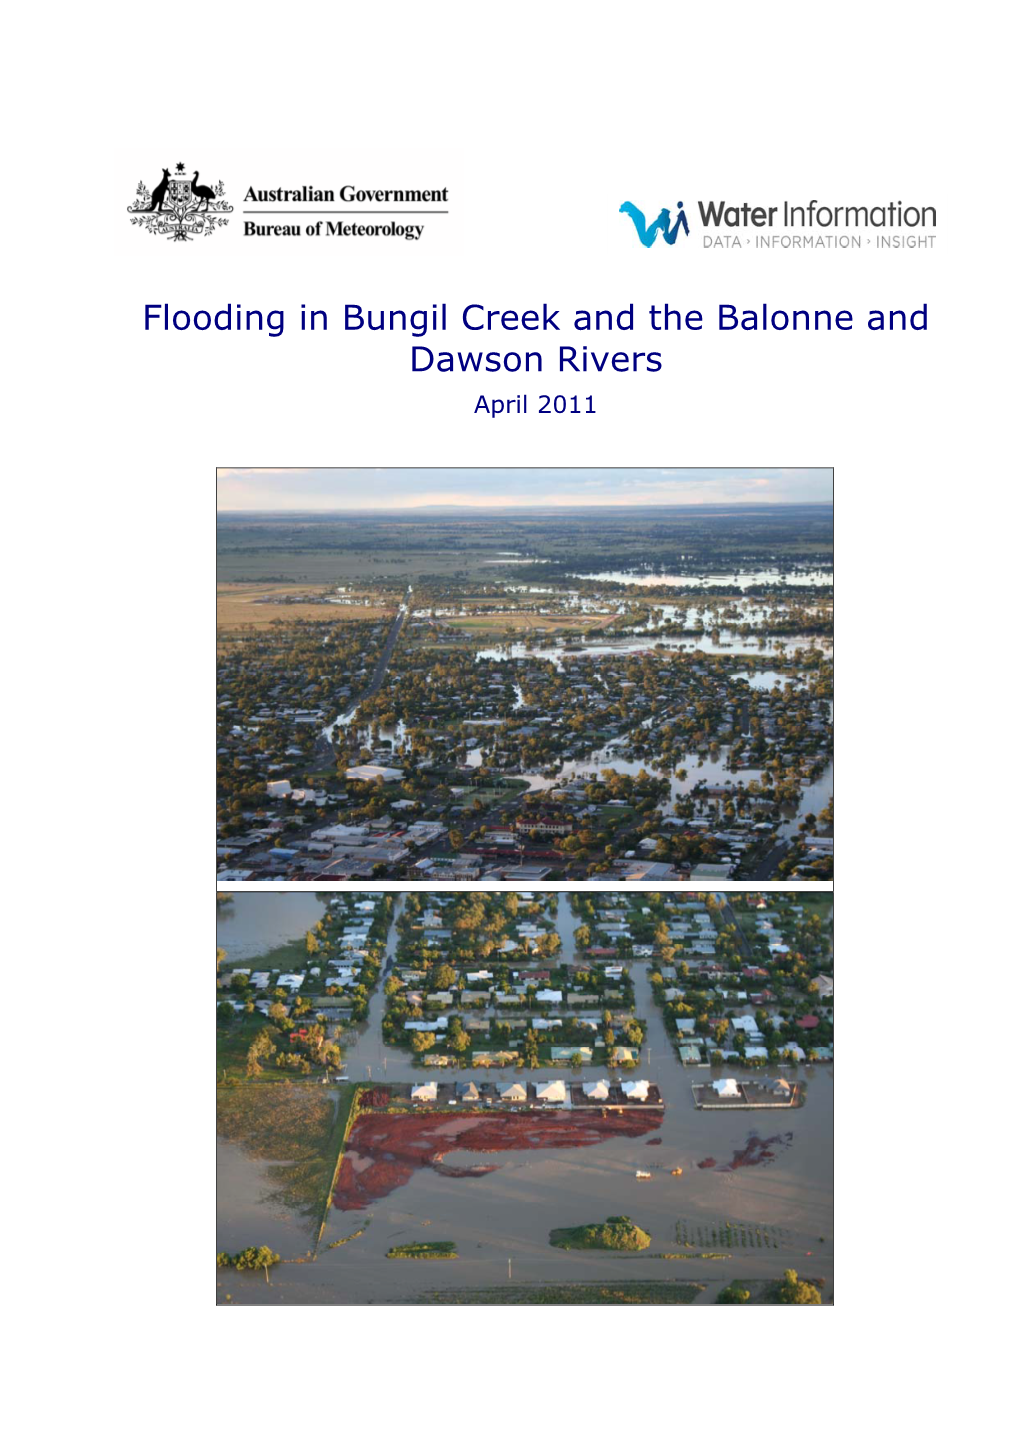 Flooding in Bungil Creek and the Balonne and Dawson Rivers April 2011